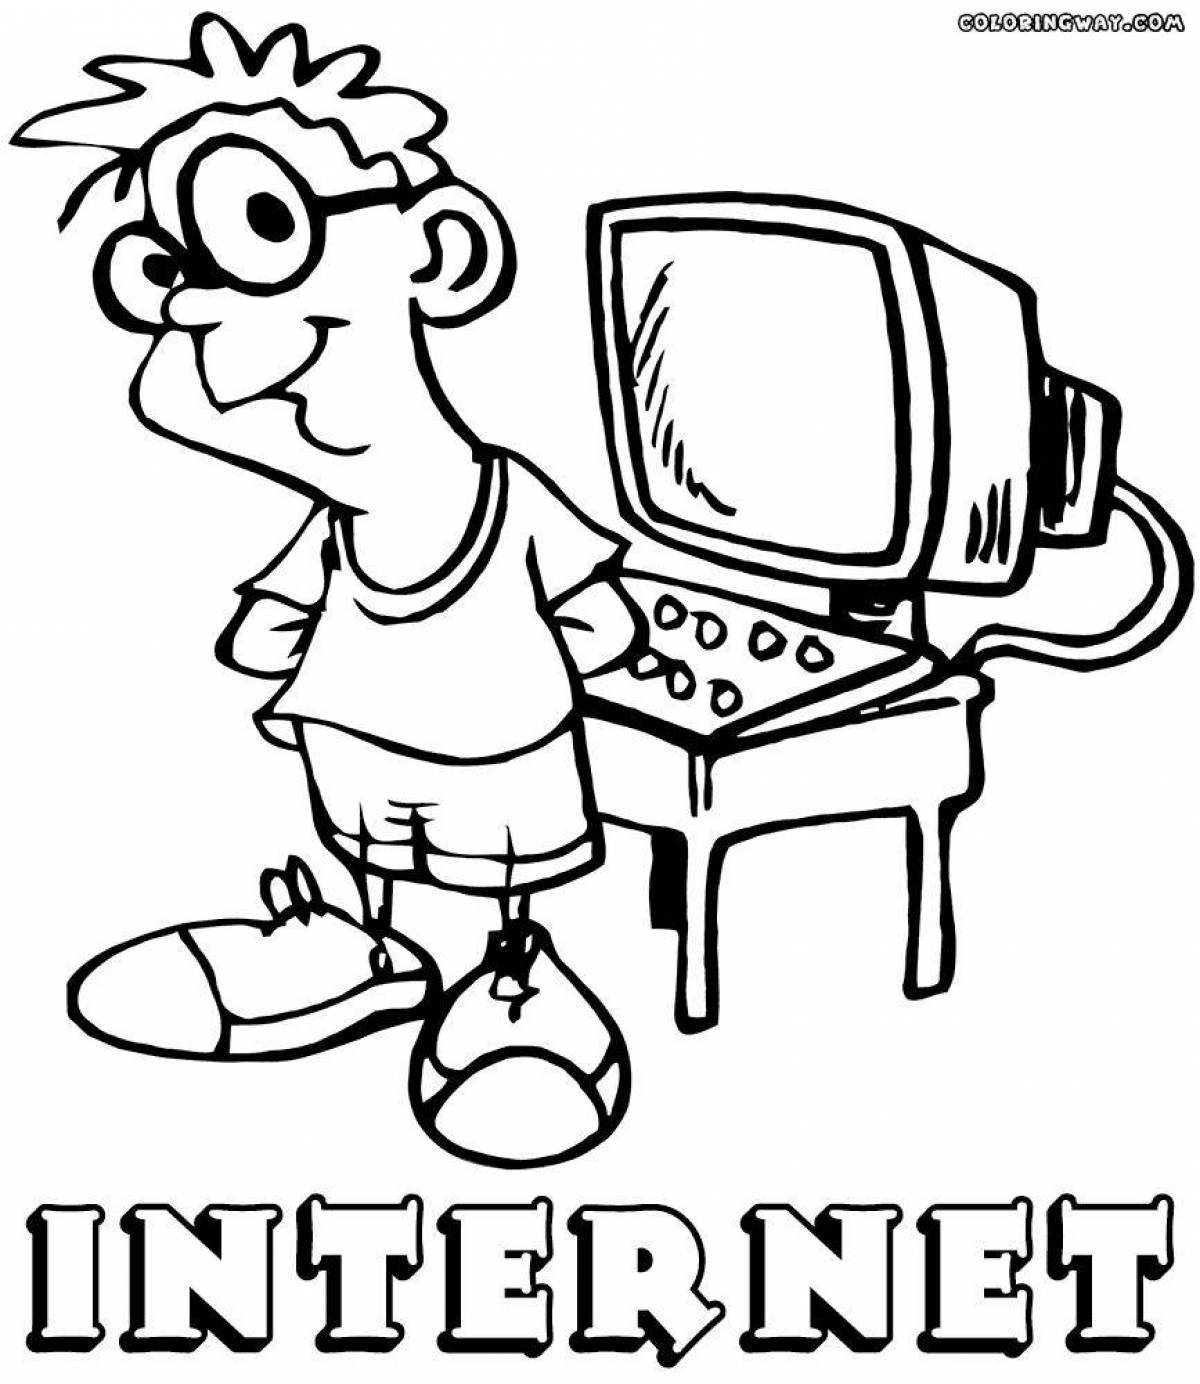 Fun safe internet coloring page